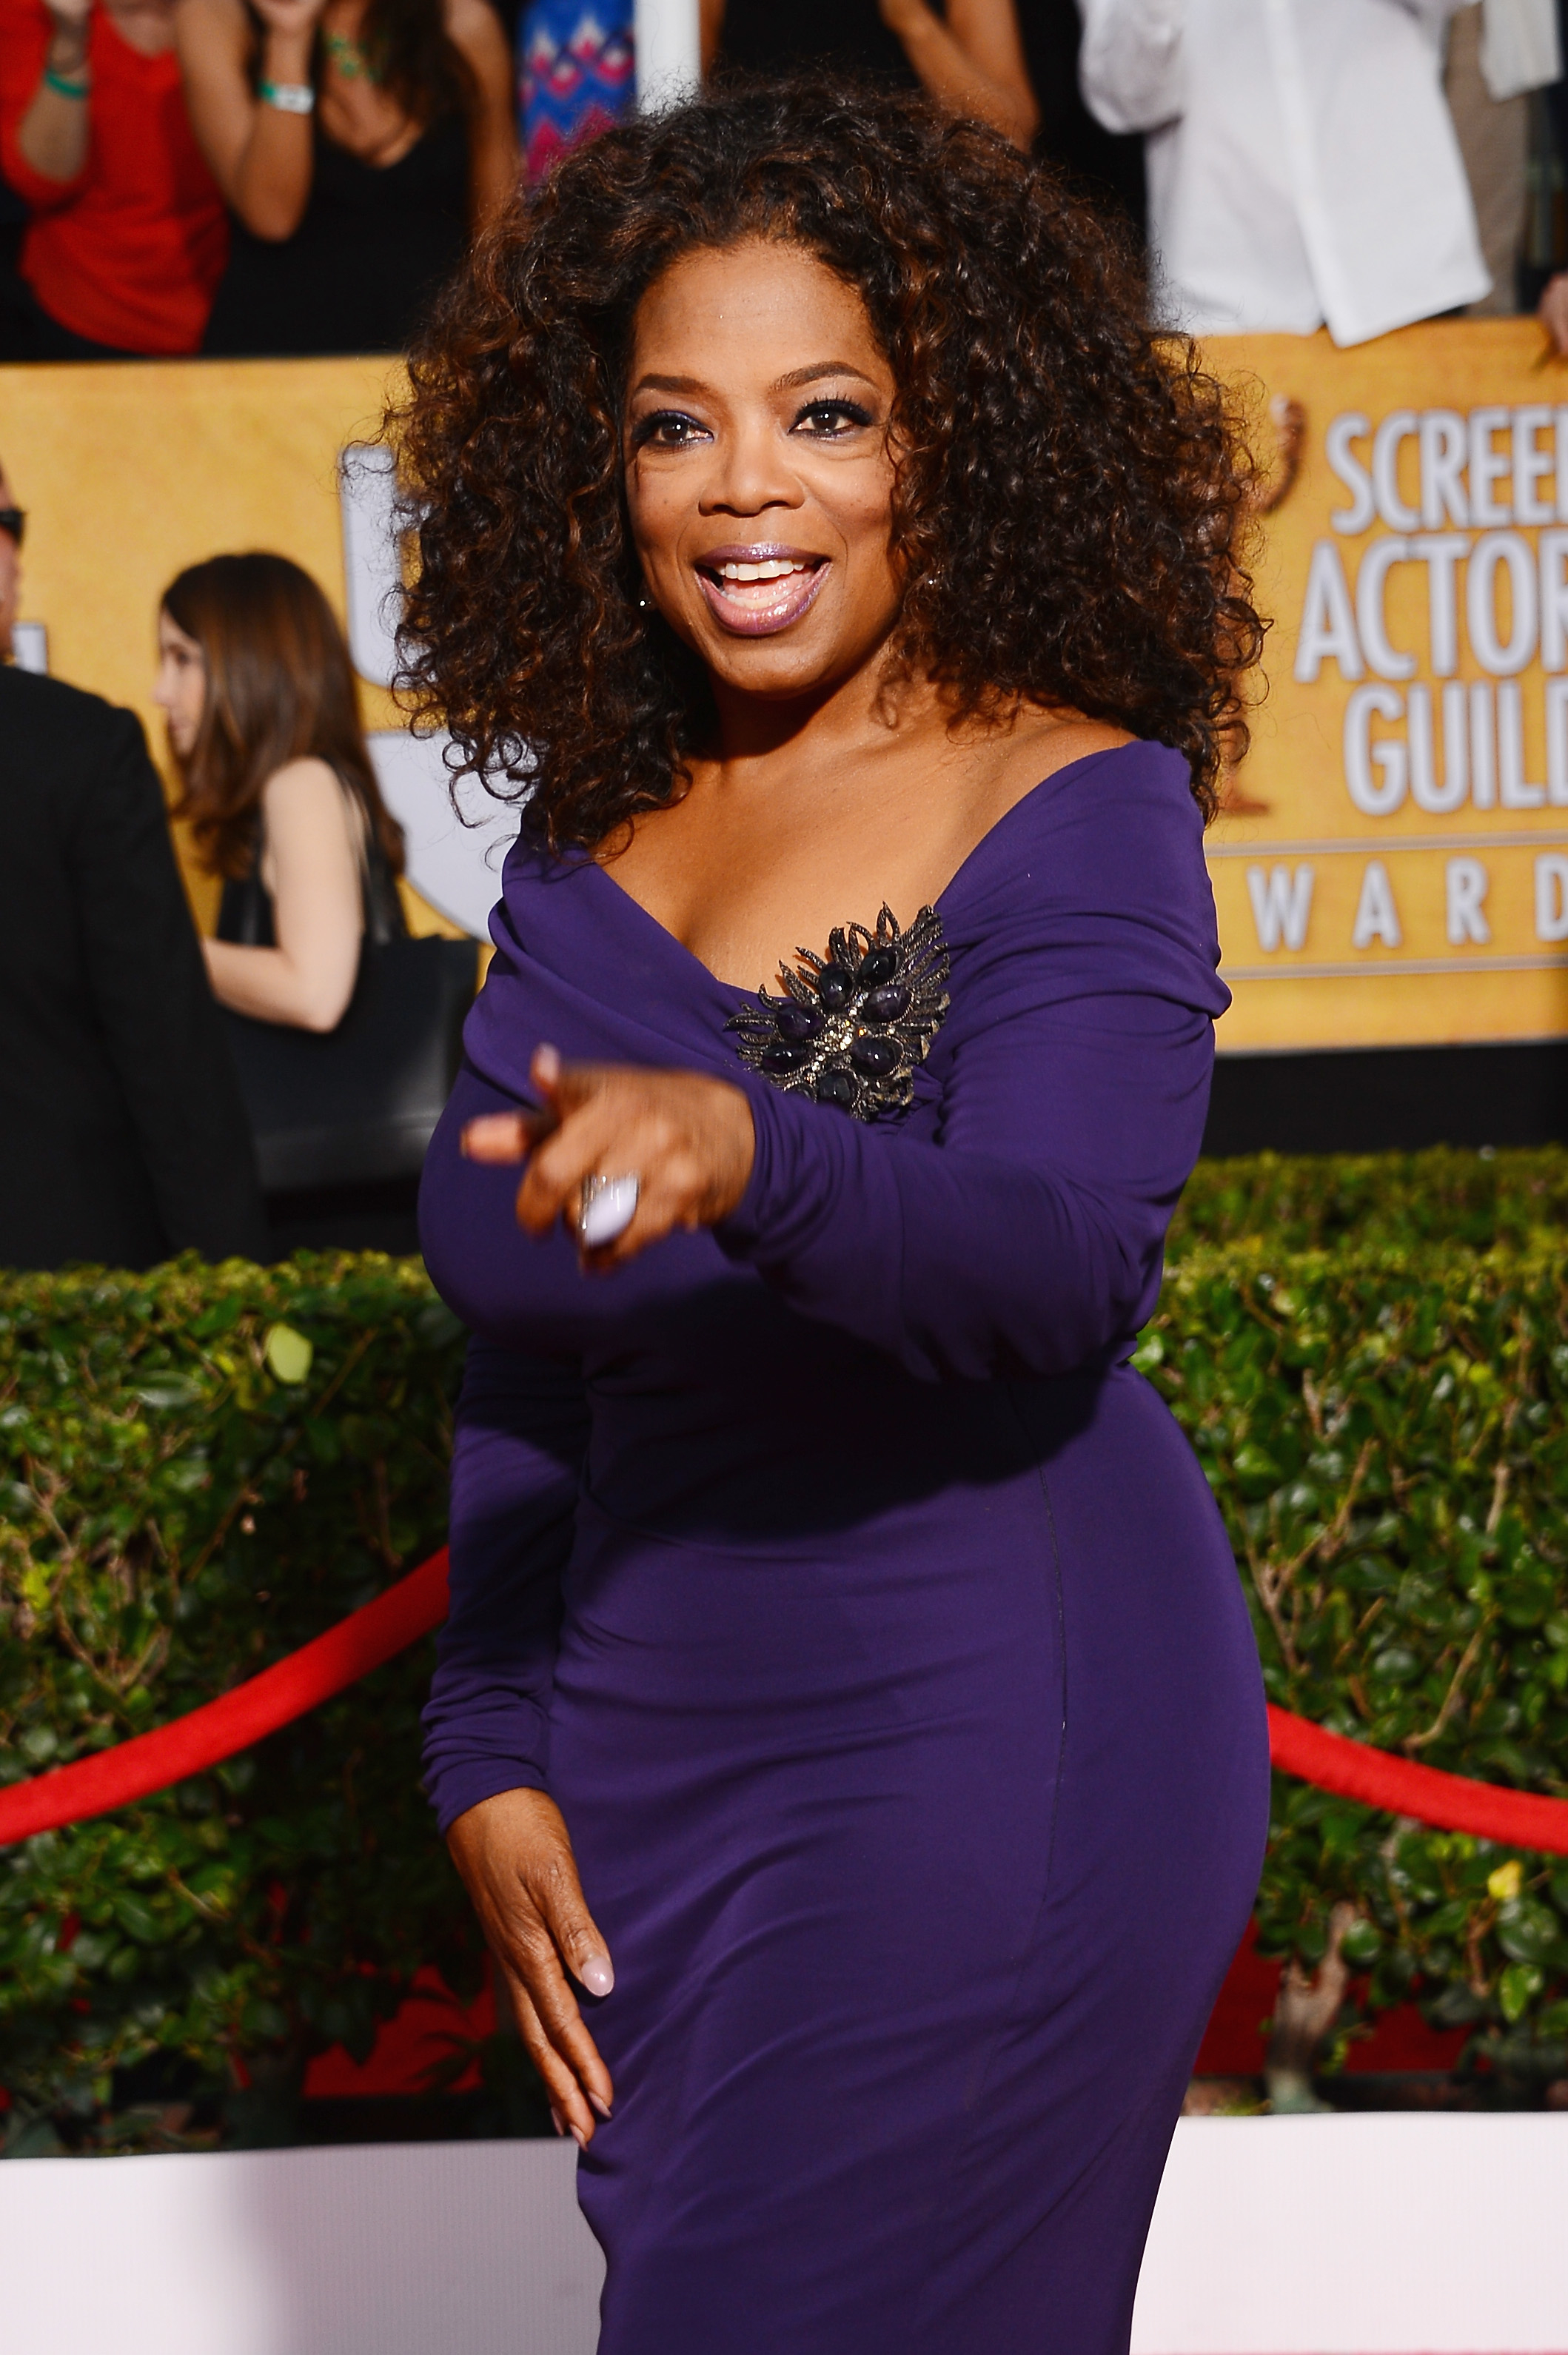 Close-up of Oprah pointing and wearing an off-the-shoulder dress at a media event